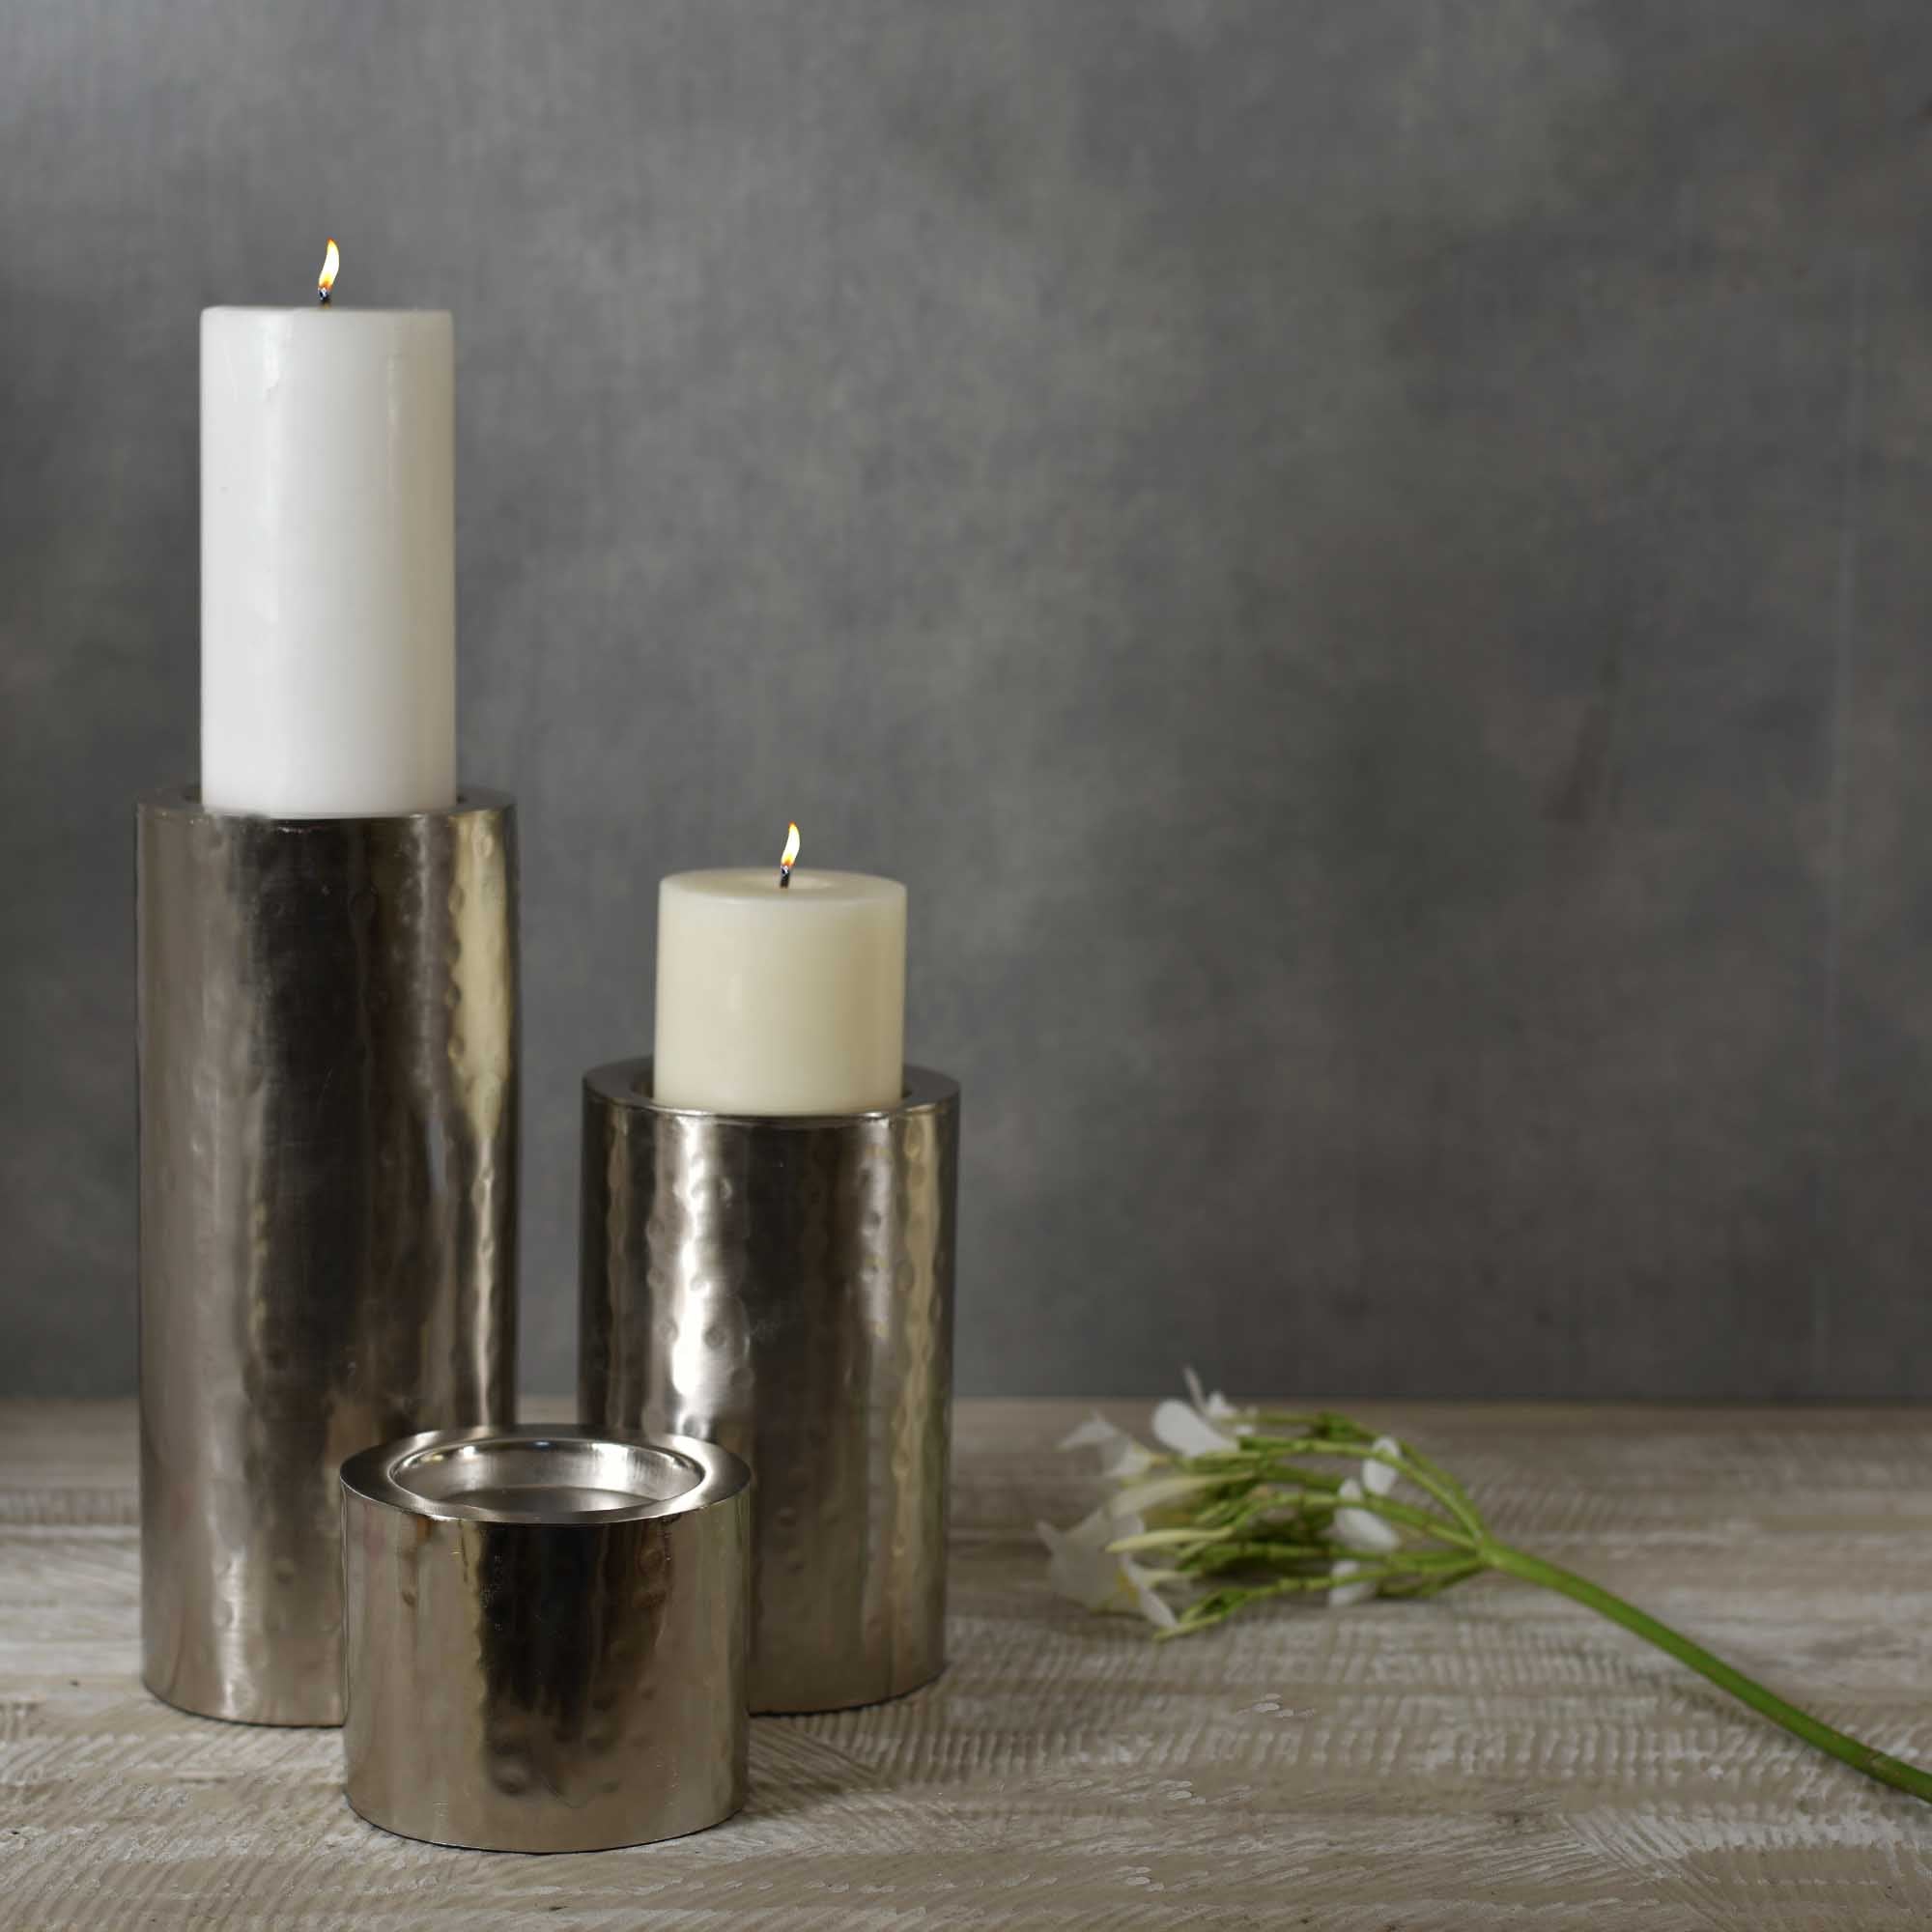 Pillar Candle Holder Set of 3 (11 inches, 7 inches and 3 inches)